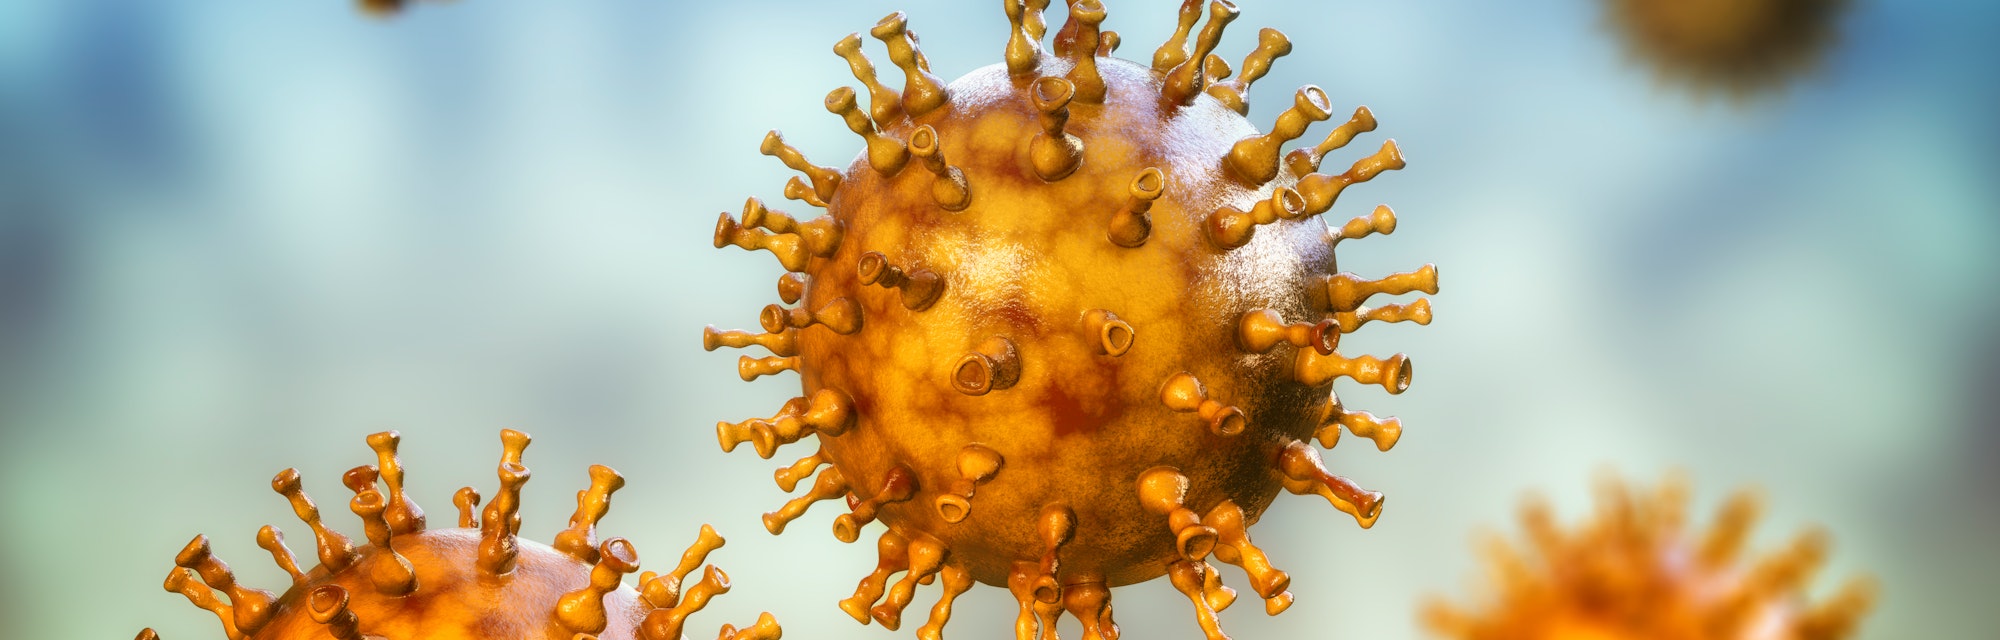 Computer illustration of a varicella zoster virus particle, the cause of chickenpox and shingles. Va...